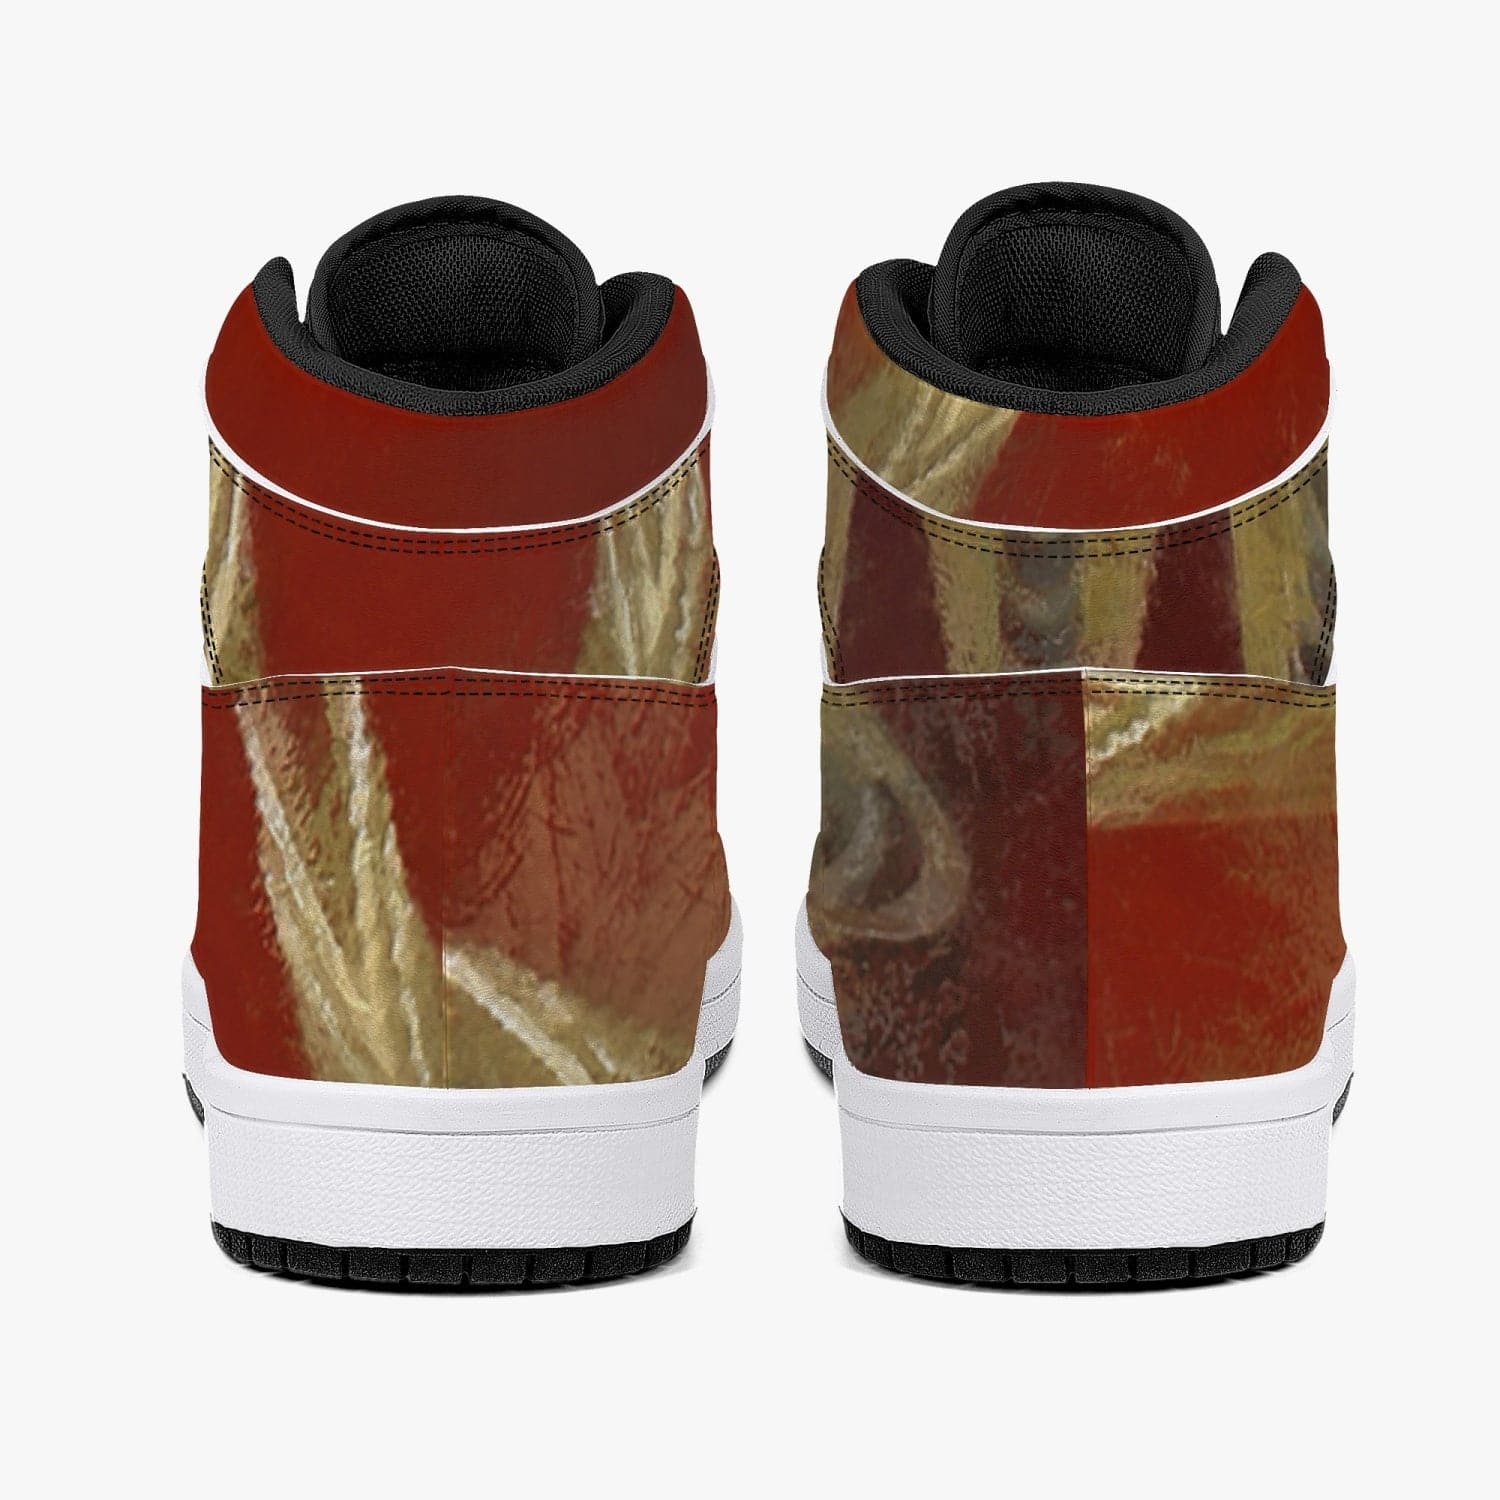 'Royalty' High-Top Leather Sneakers - White / Black. Design: Humphrey Isselt for Sensus Studio